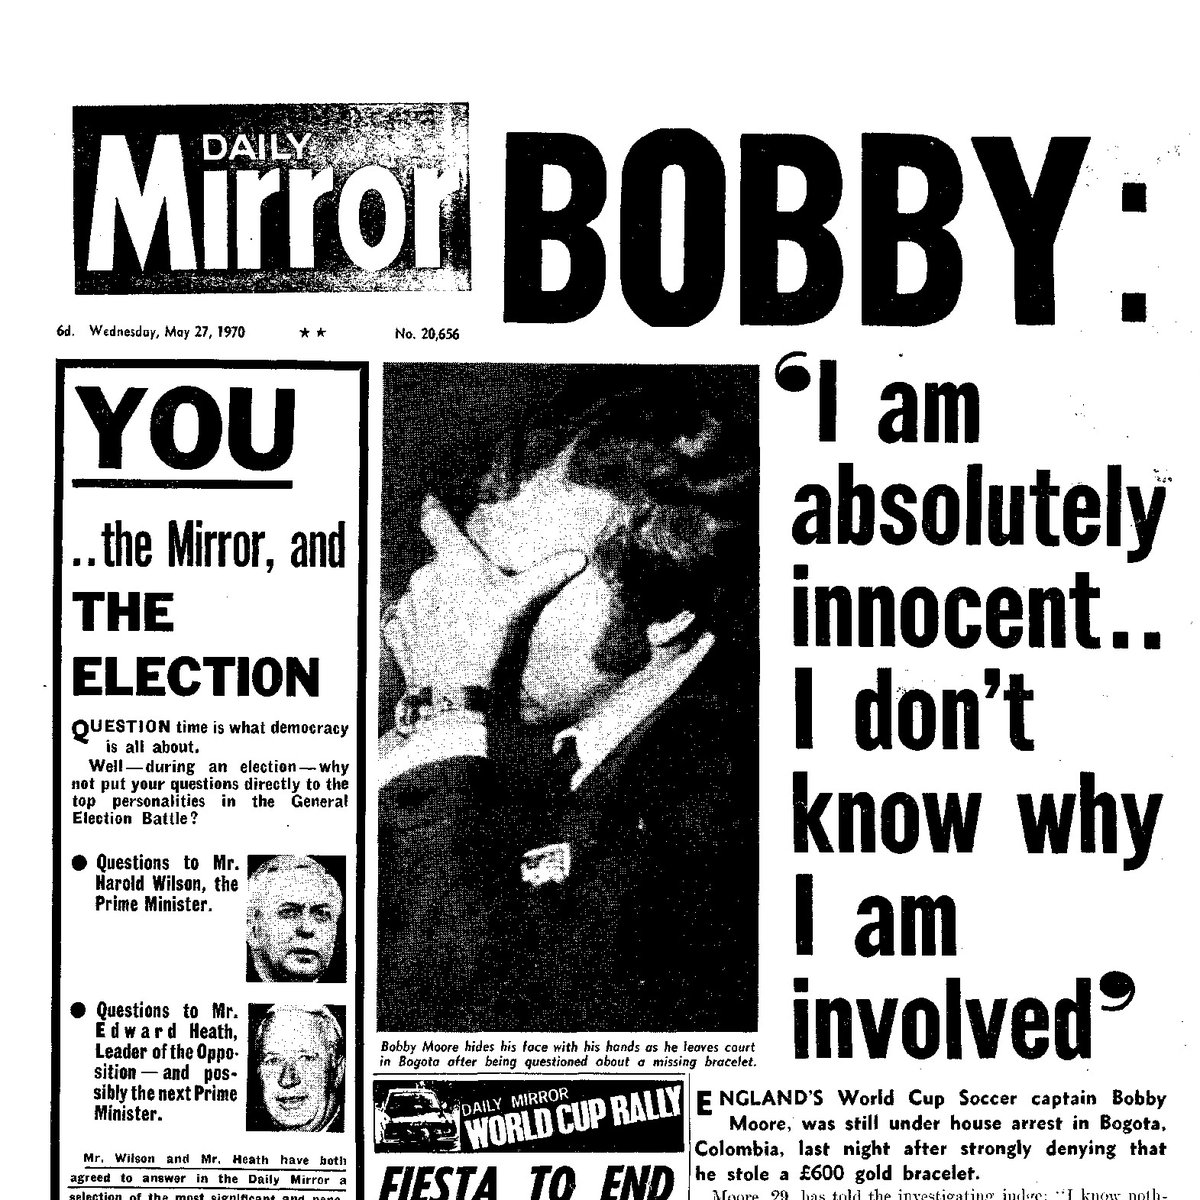 Labour’s manifesto launch was overshadowed by the news that Bobby Moore had been arrested Bogota Wilson immediately sent a cable to the FA President and offering to contact the Colombian Prime Minister personally to speed up a release.